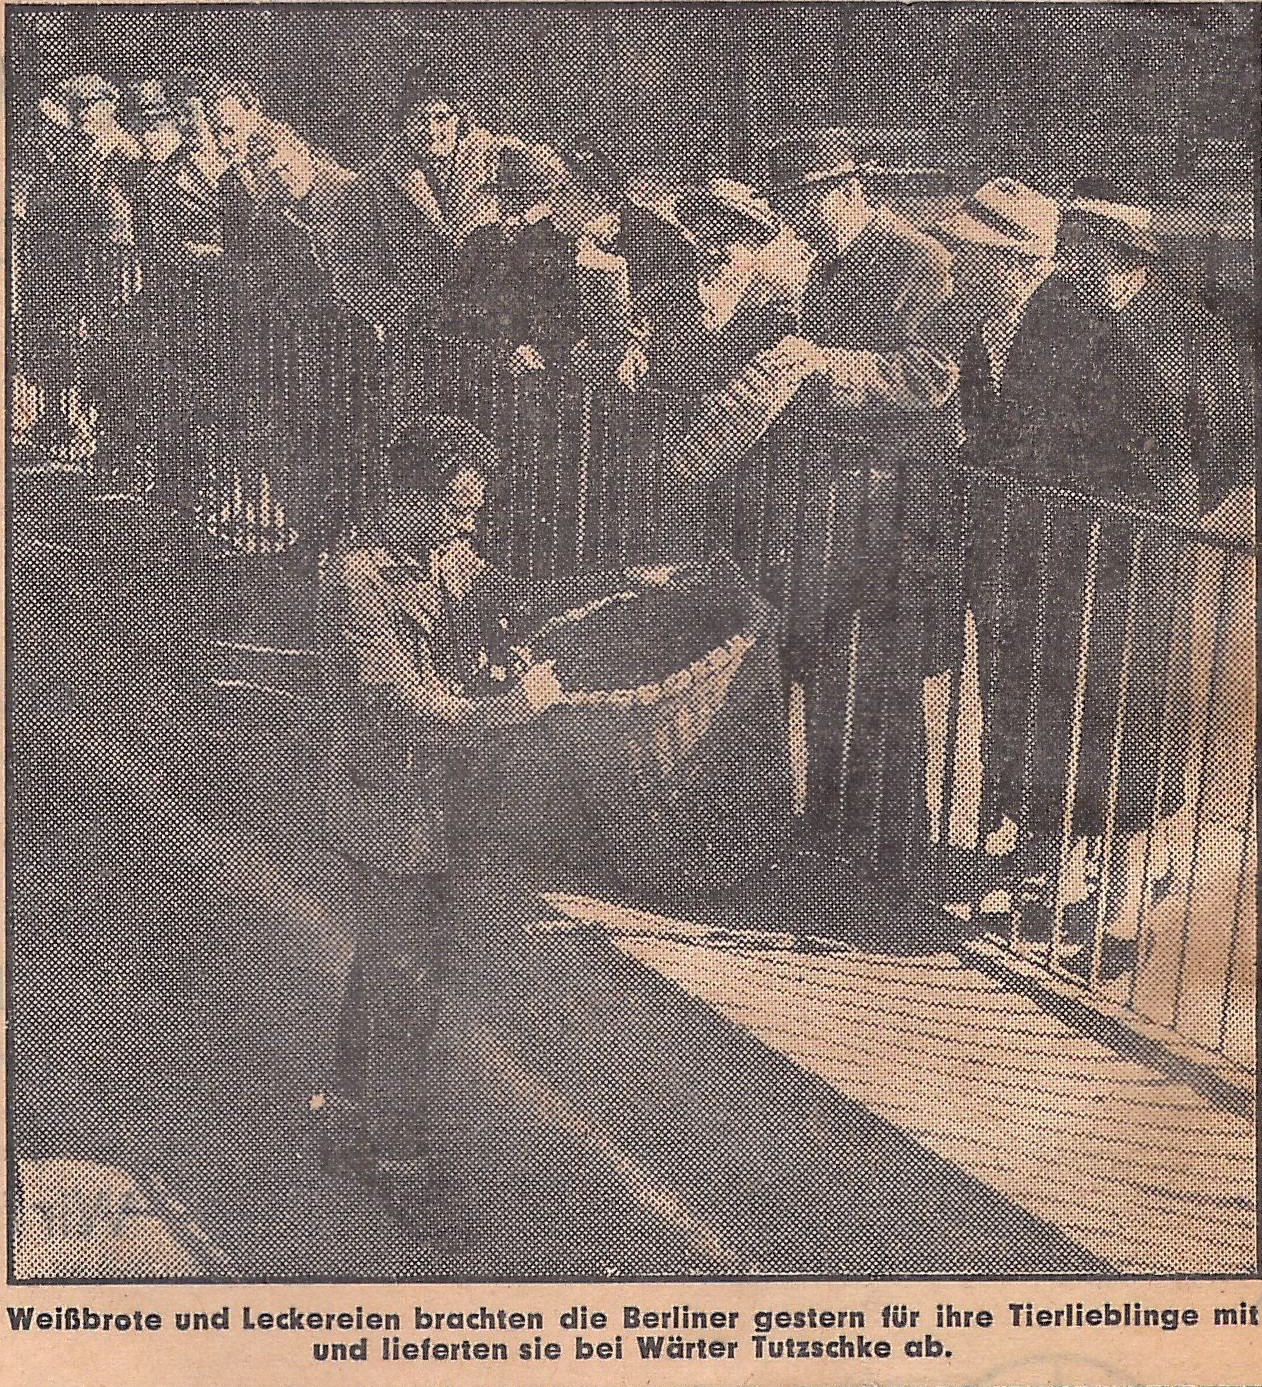 Newspaper clipping. Text: Yesterday, Berliners brought white bread and treats for their favorite animals and dropped them off with keeper Tutzschke. Photo: A zookeeper with a large basket stands in the trench of the elephant enclosure, while one of the visitors throws a loaf of bread into the basket from behind the railing.